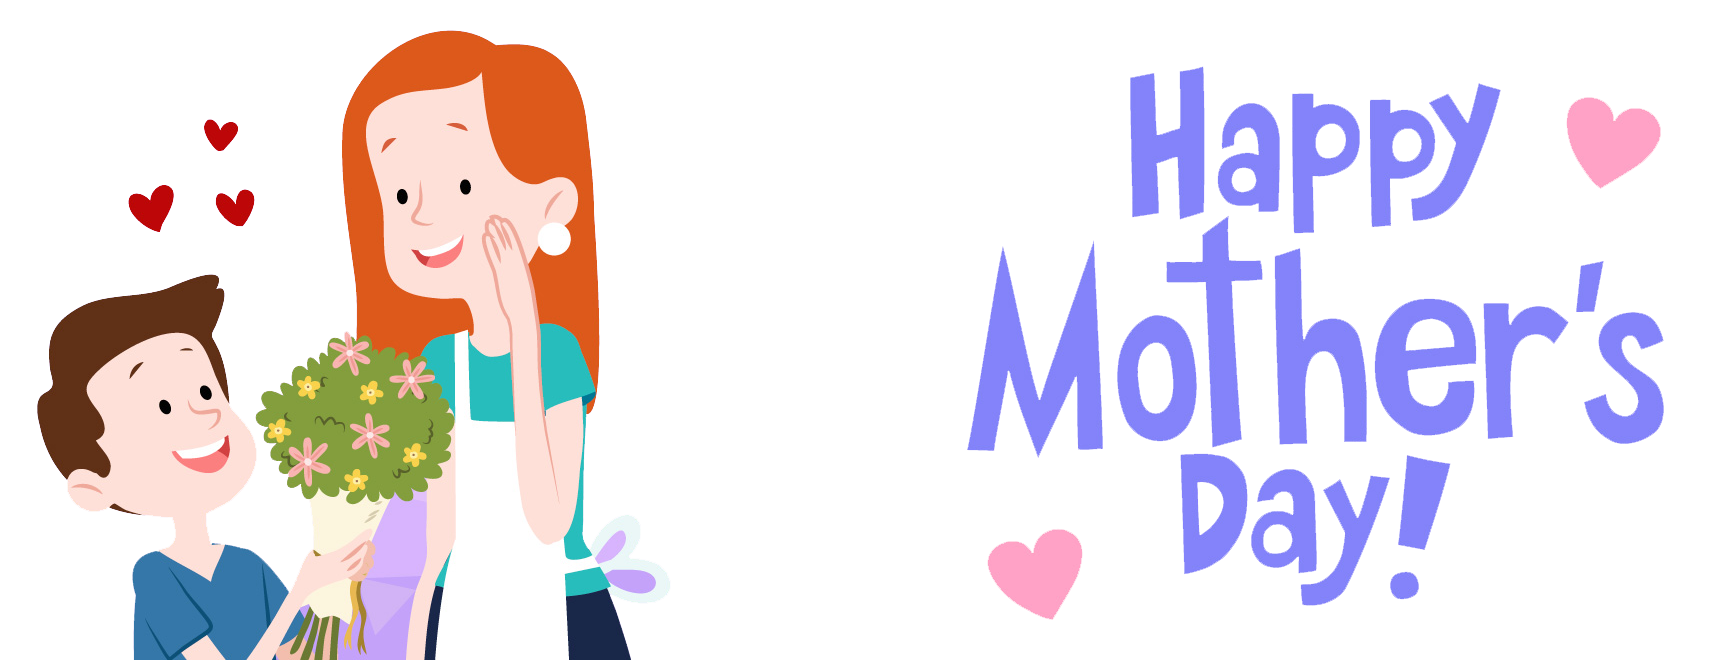 dogs clipart mothers day